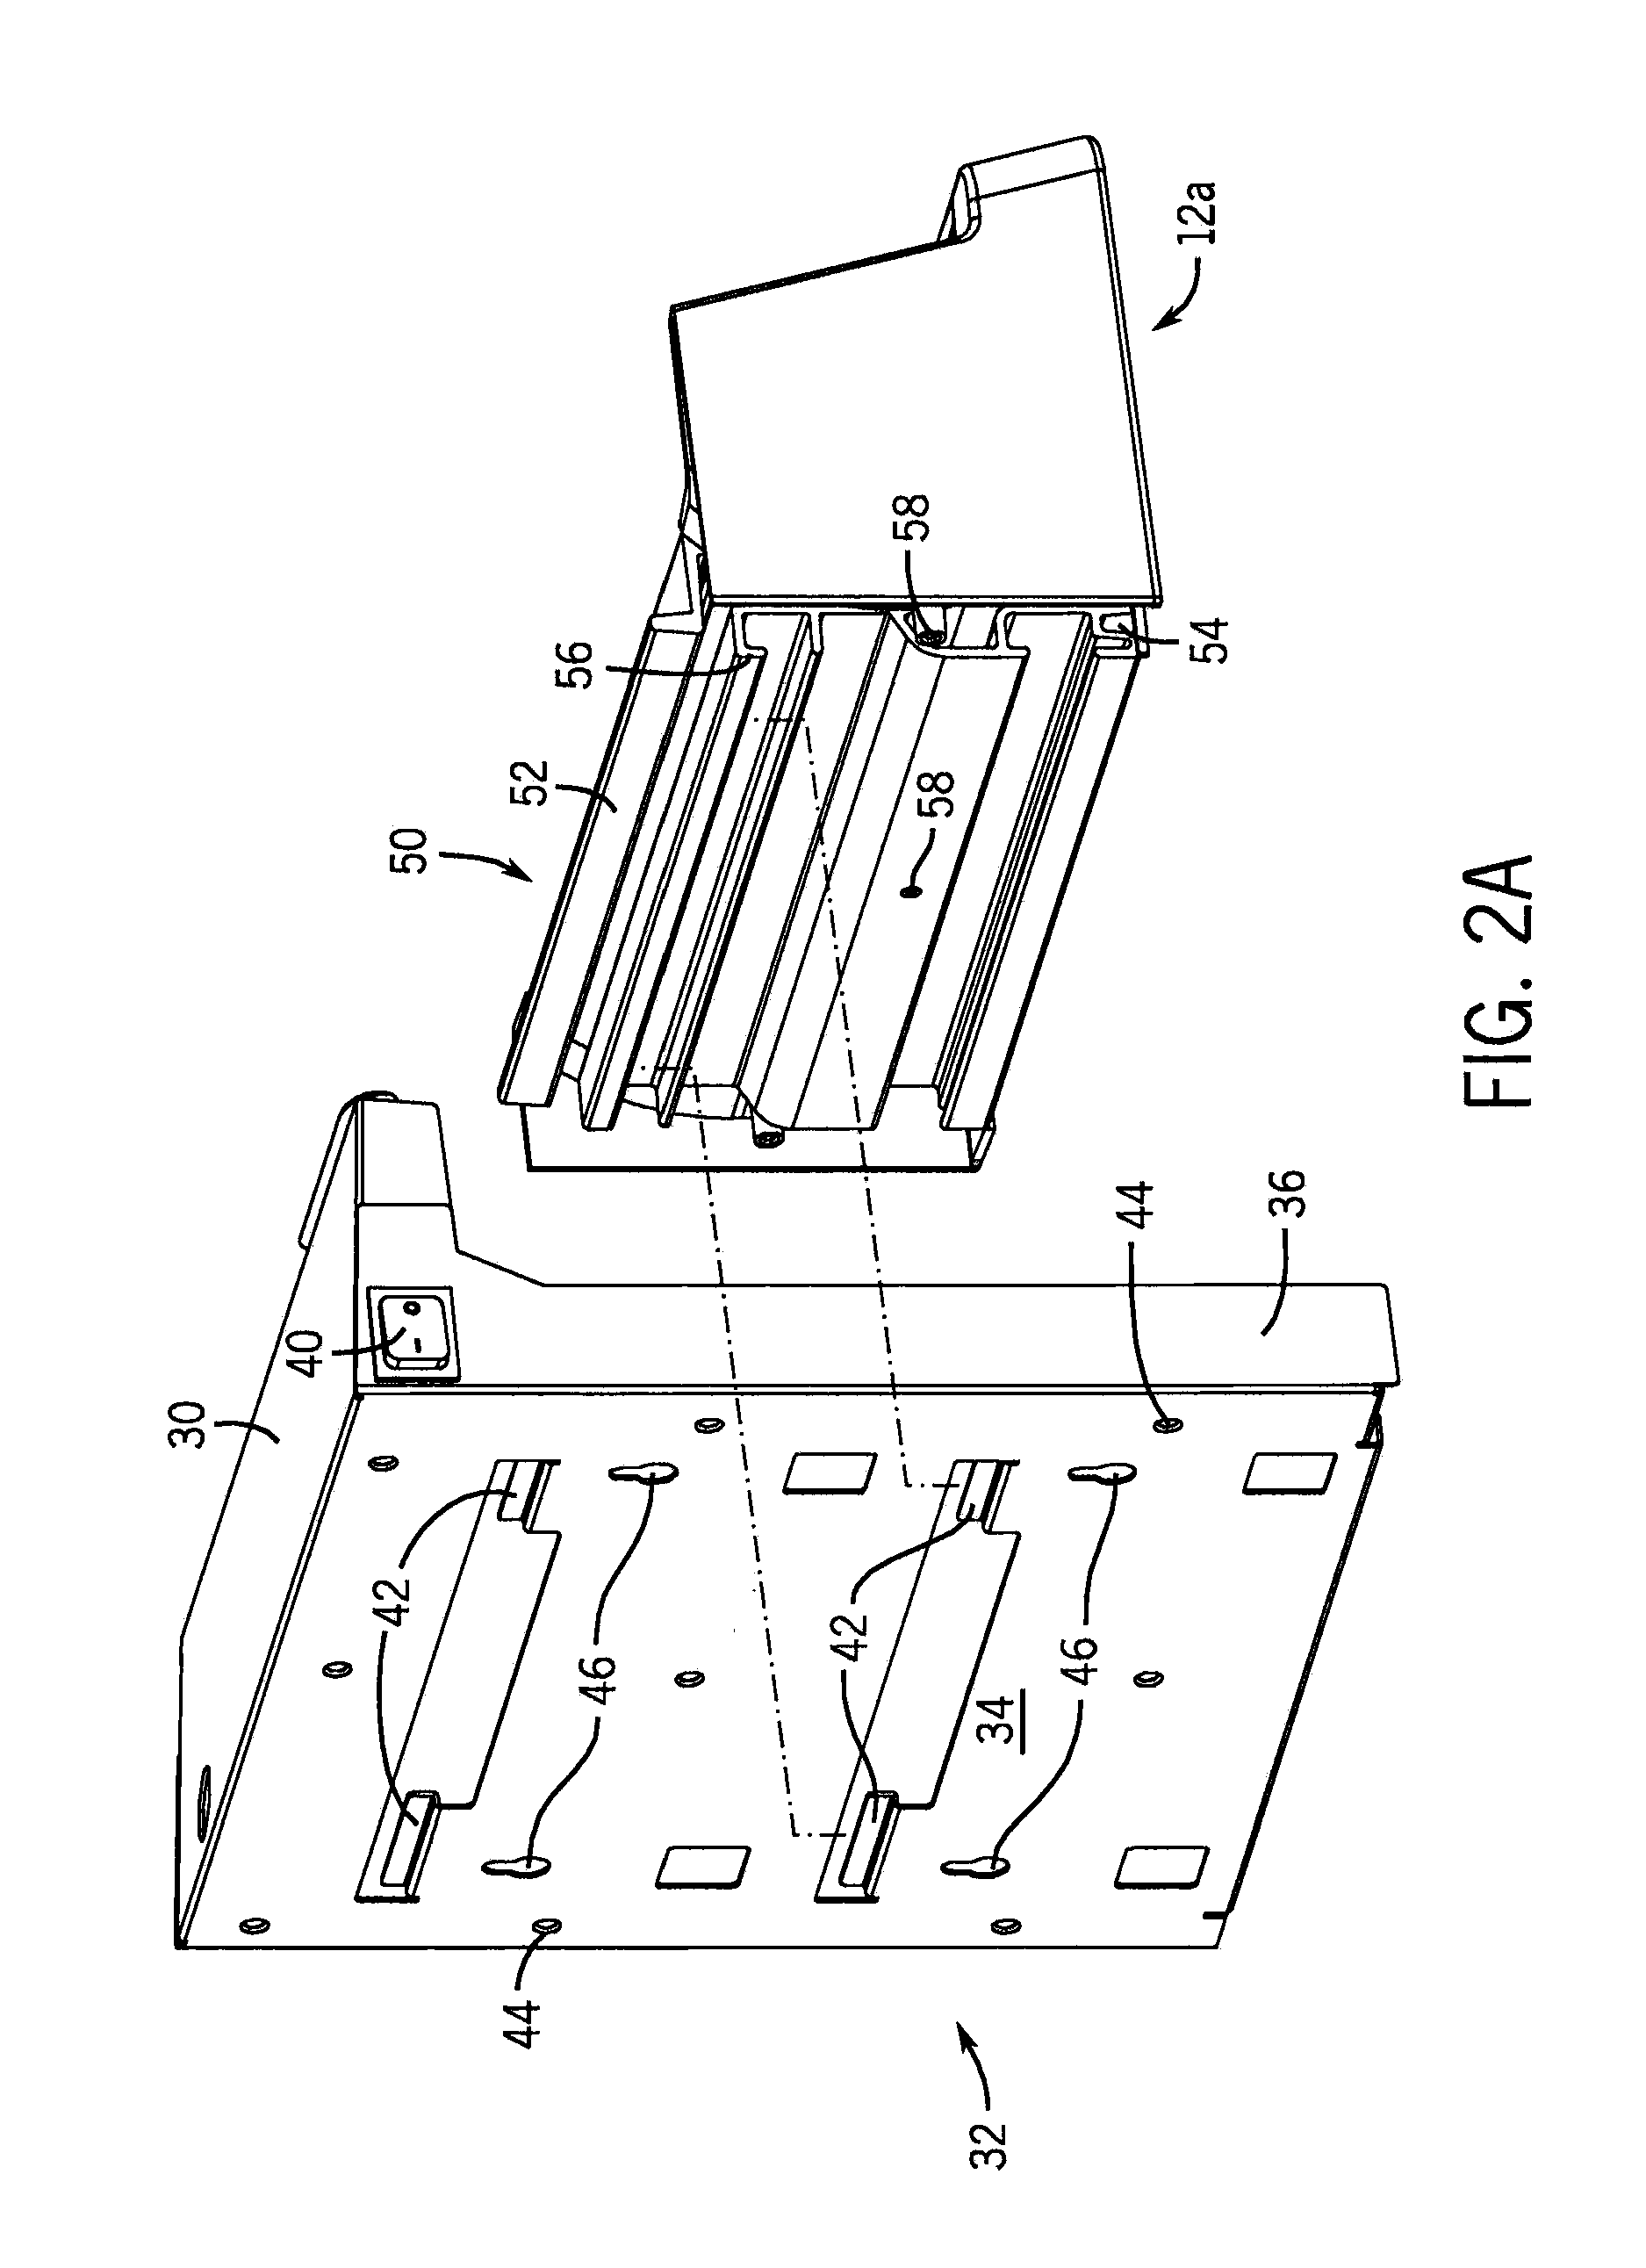 Fluid warmer with switch assembly